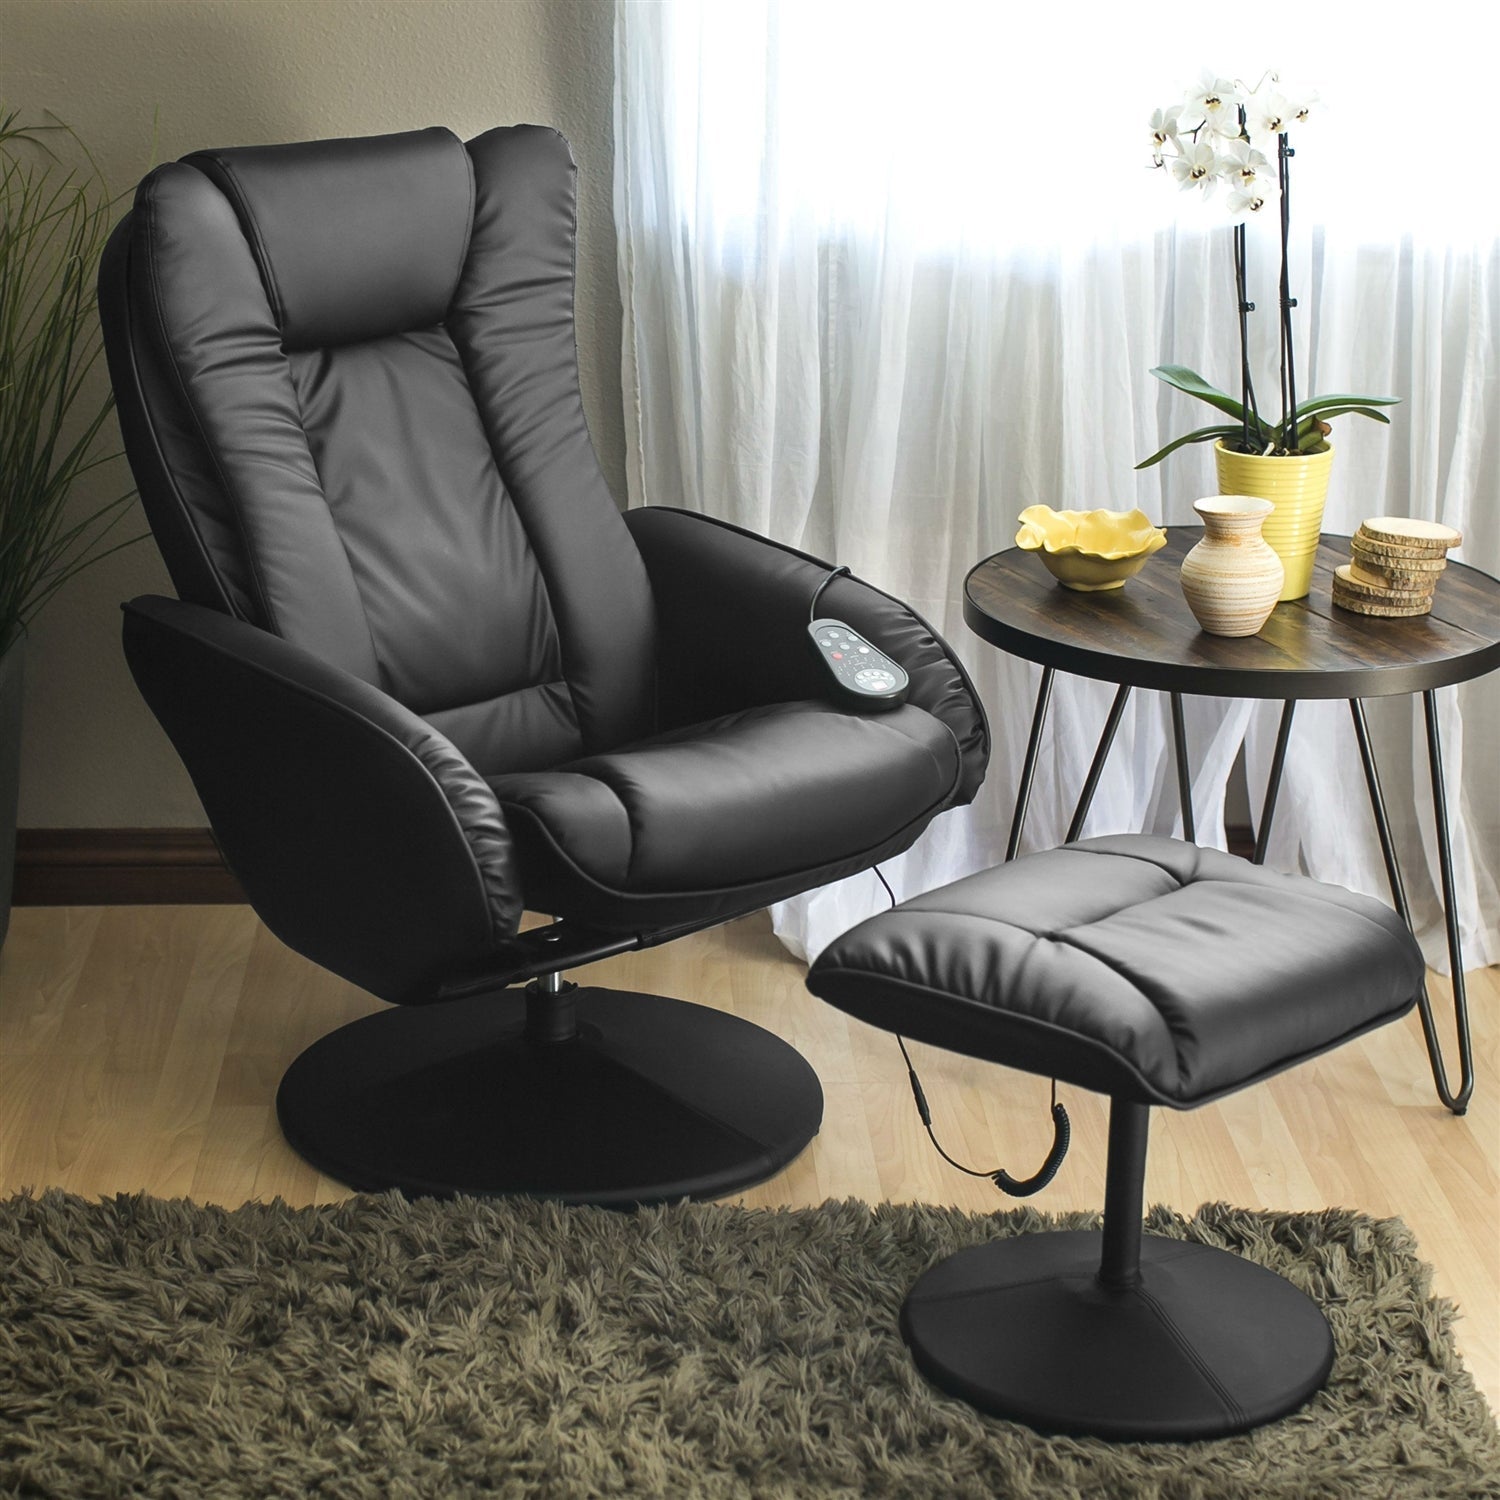 Living Room > Recliners And Leather Recliner - Sturdy Black Faux Leather Electric Massage Recliner Chair W/ Ottoman